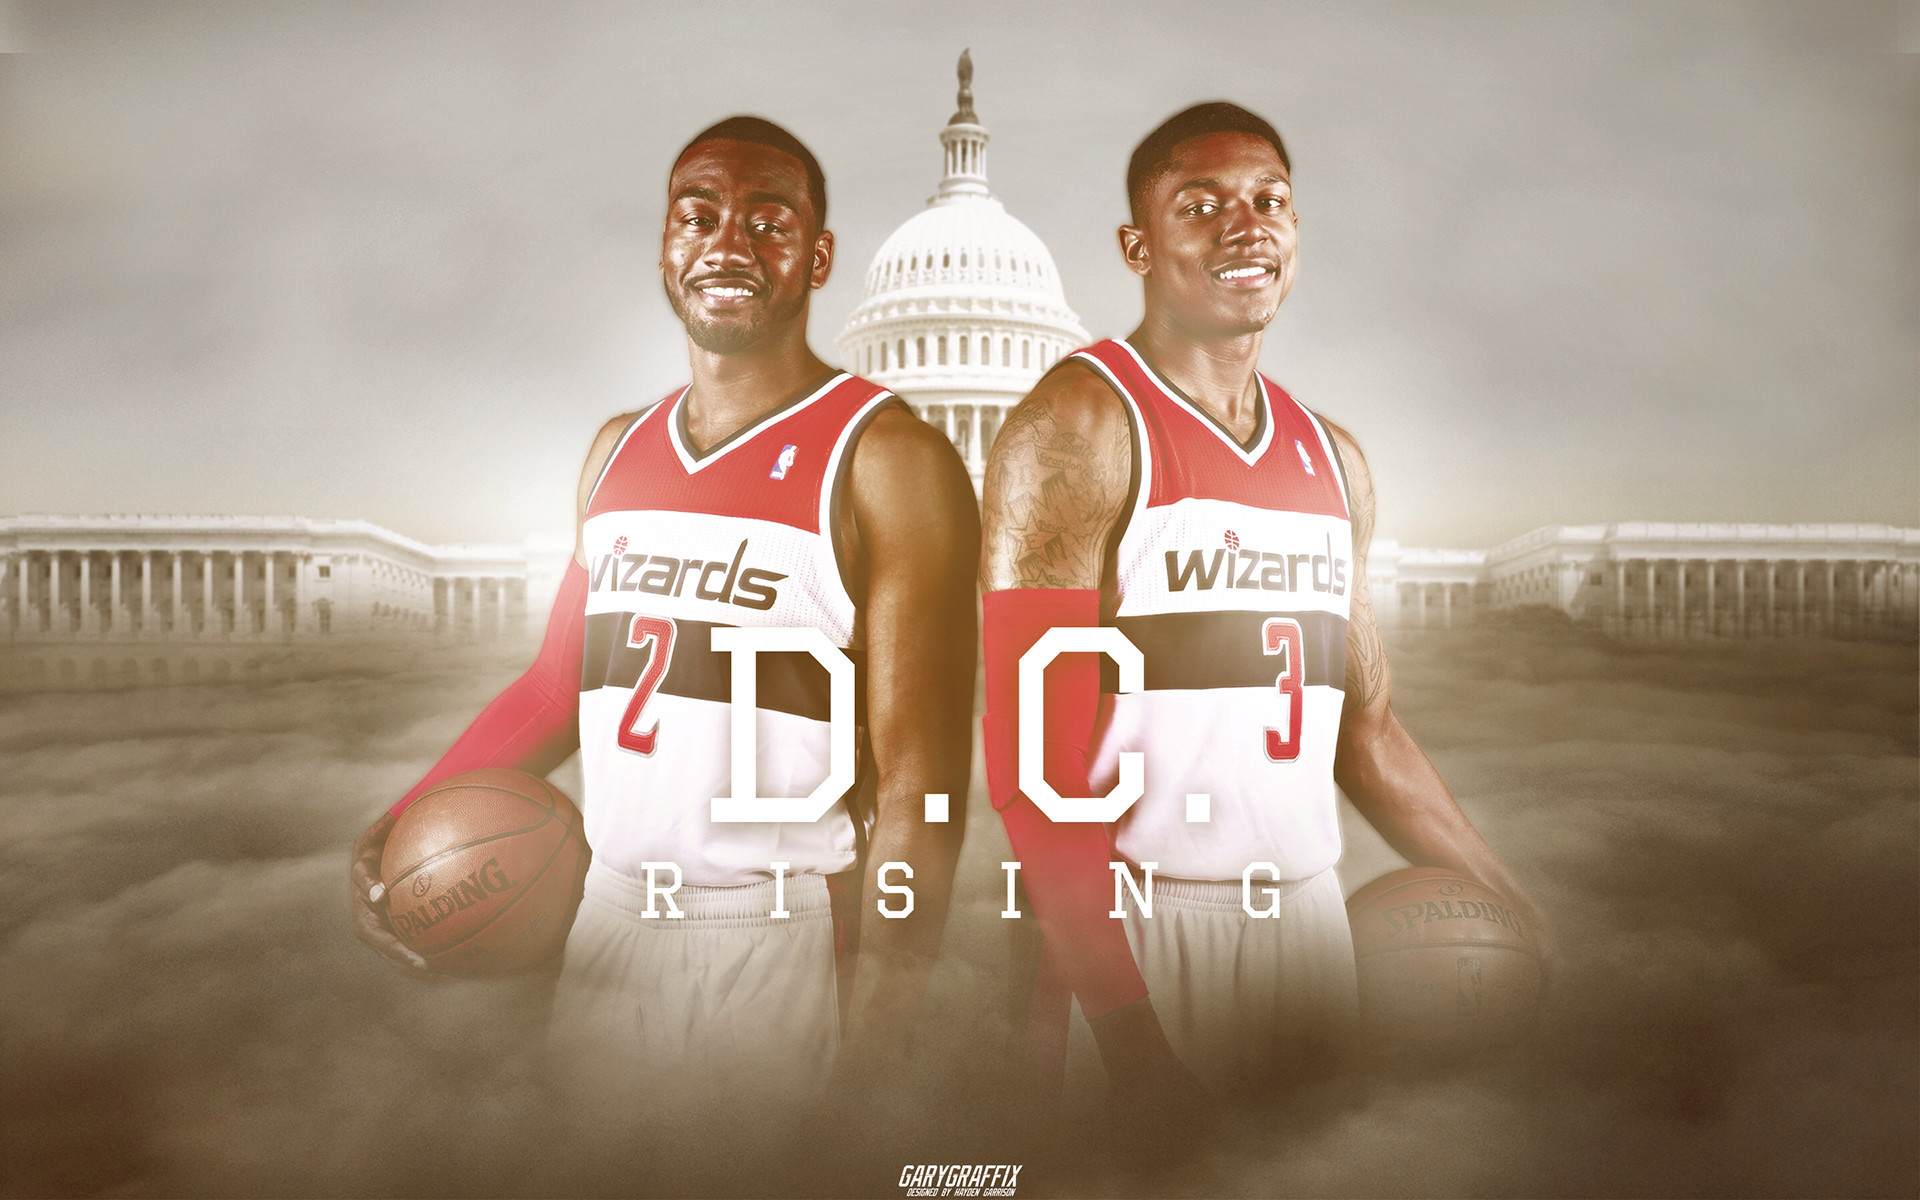 1920x1200 Wizards Wallpaper featuring John Wall and Bradley Beal. The clouds photo  was taken by me on an airplane to Dallas.